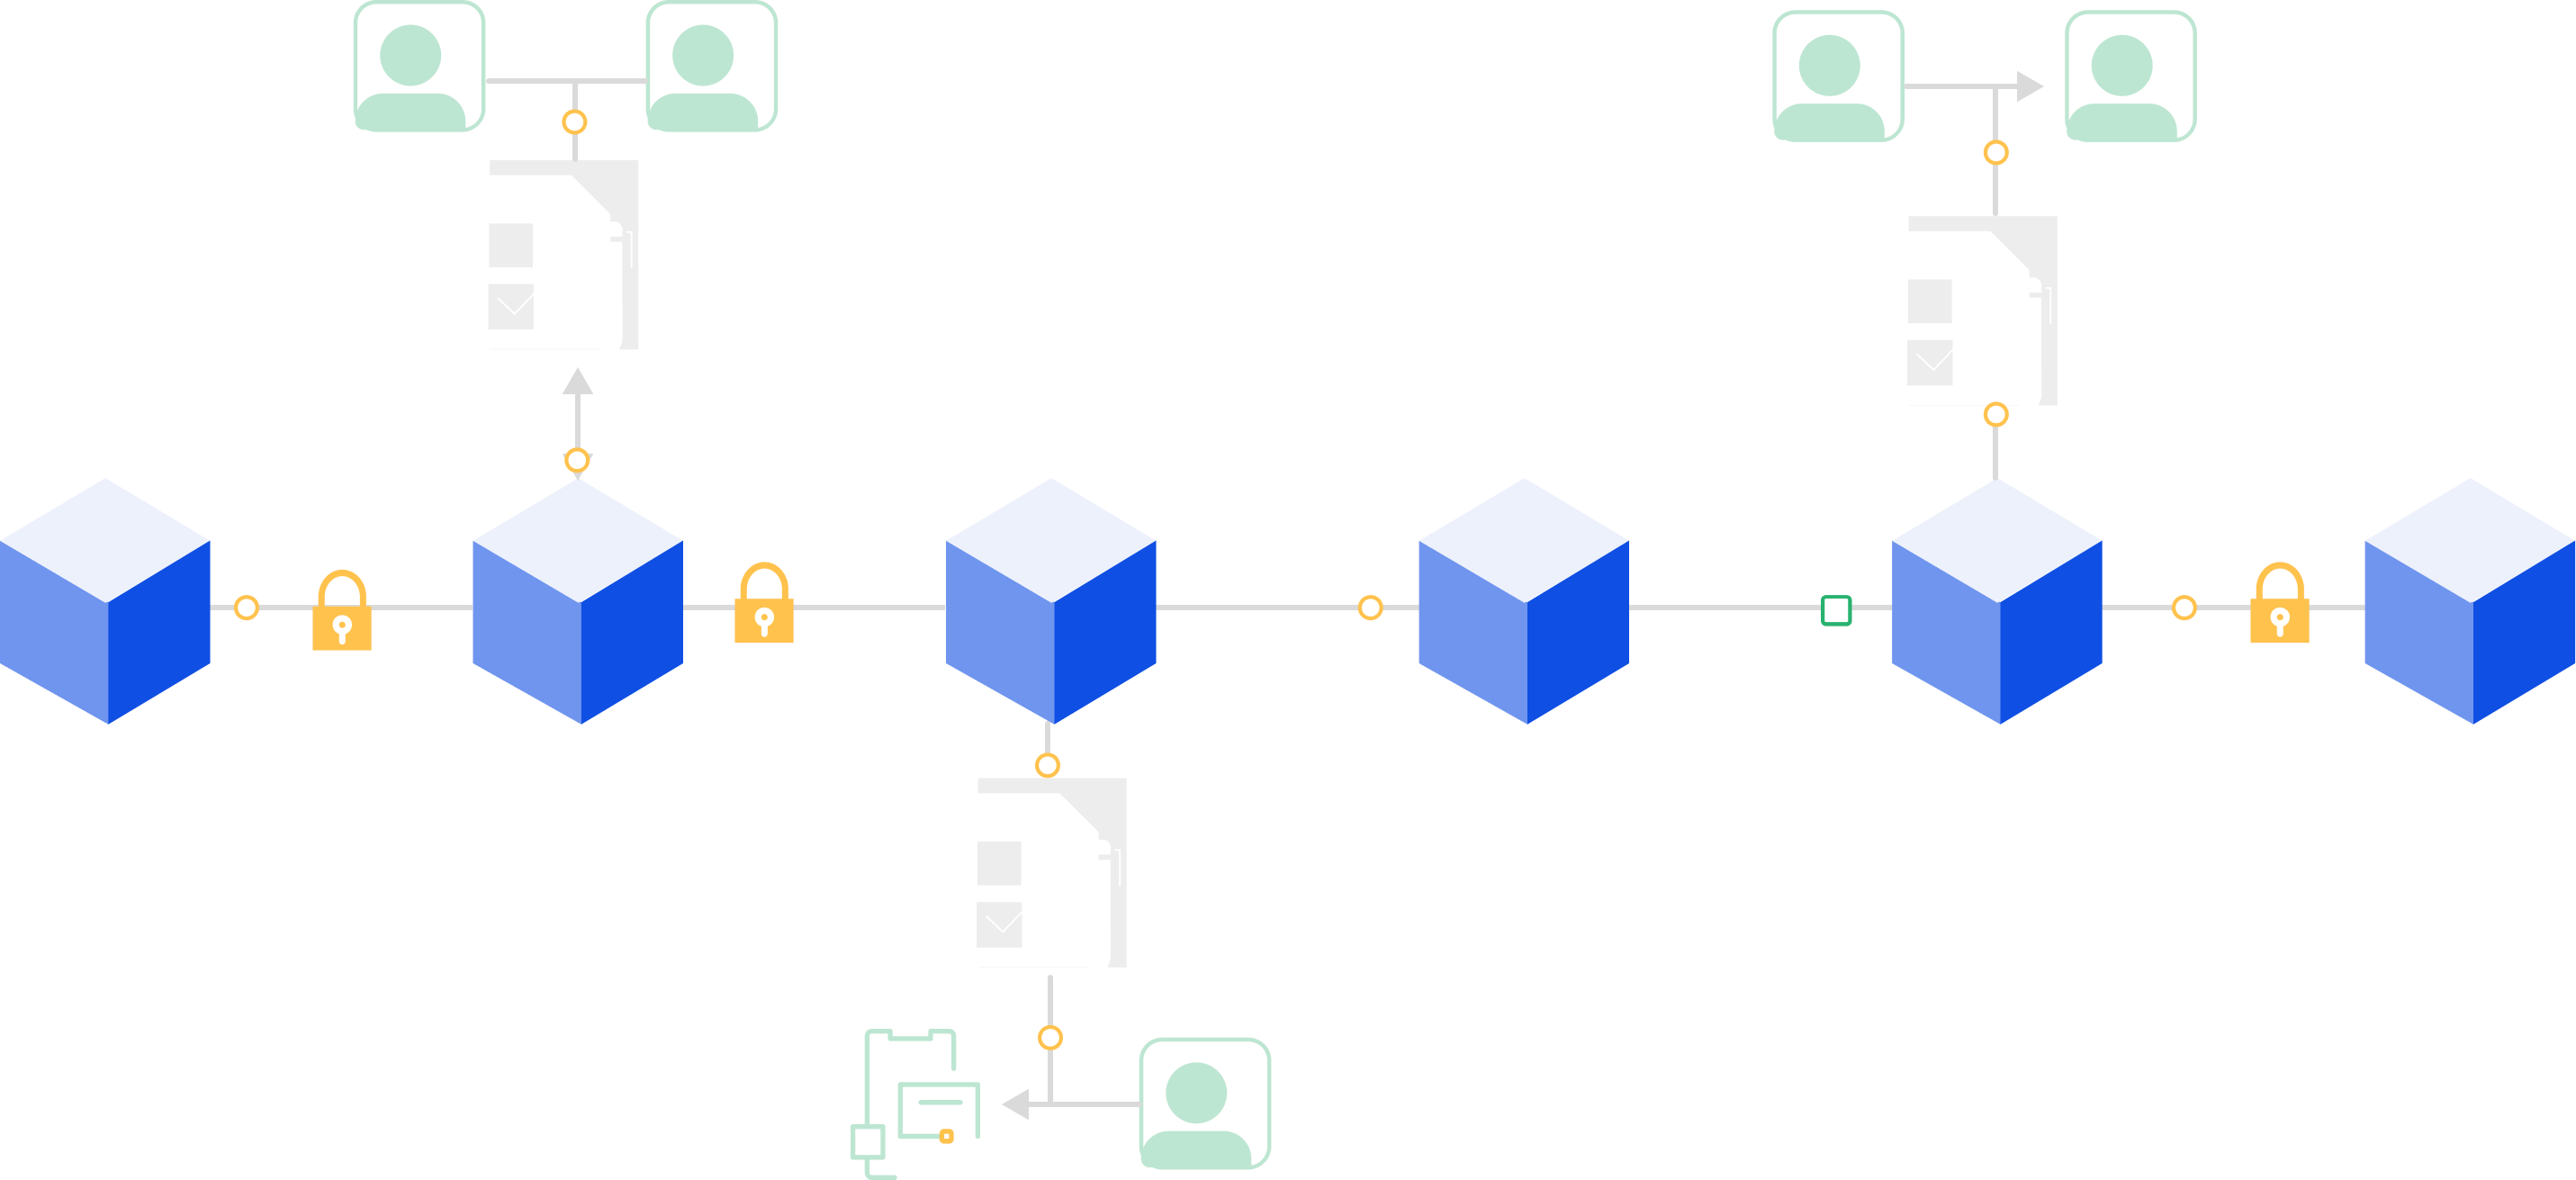 A blockchain is a digital ledger comprising a complete record that is duplicated and distributed transactions within a given network of computer systems.